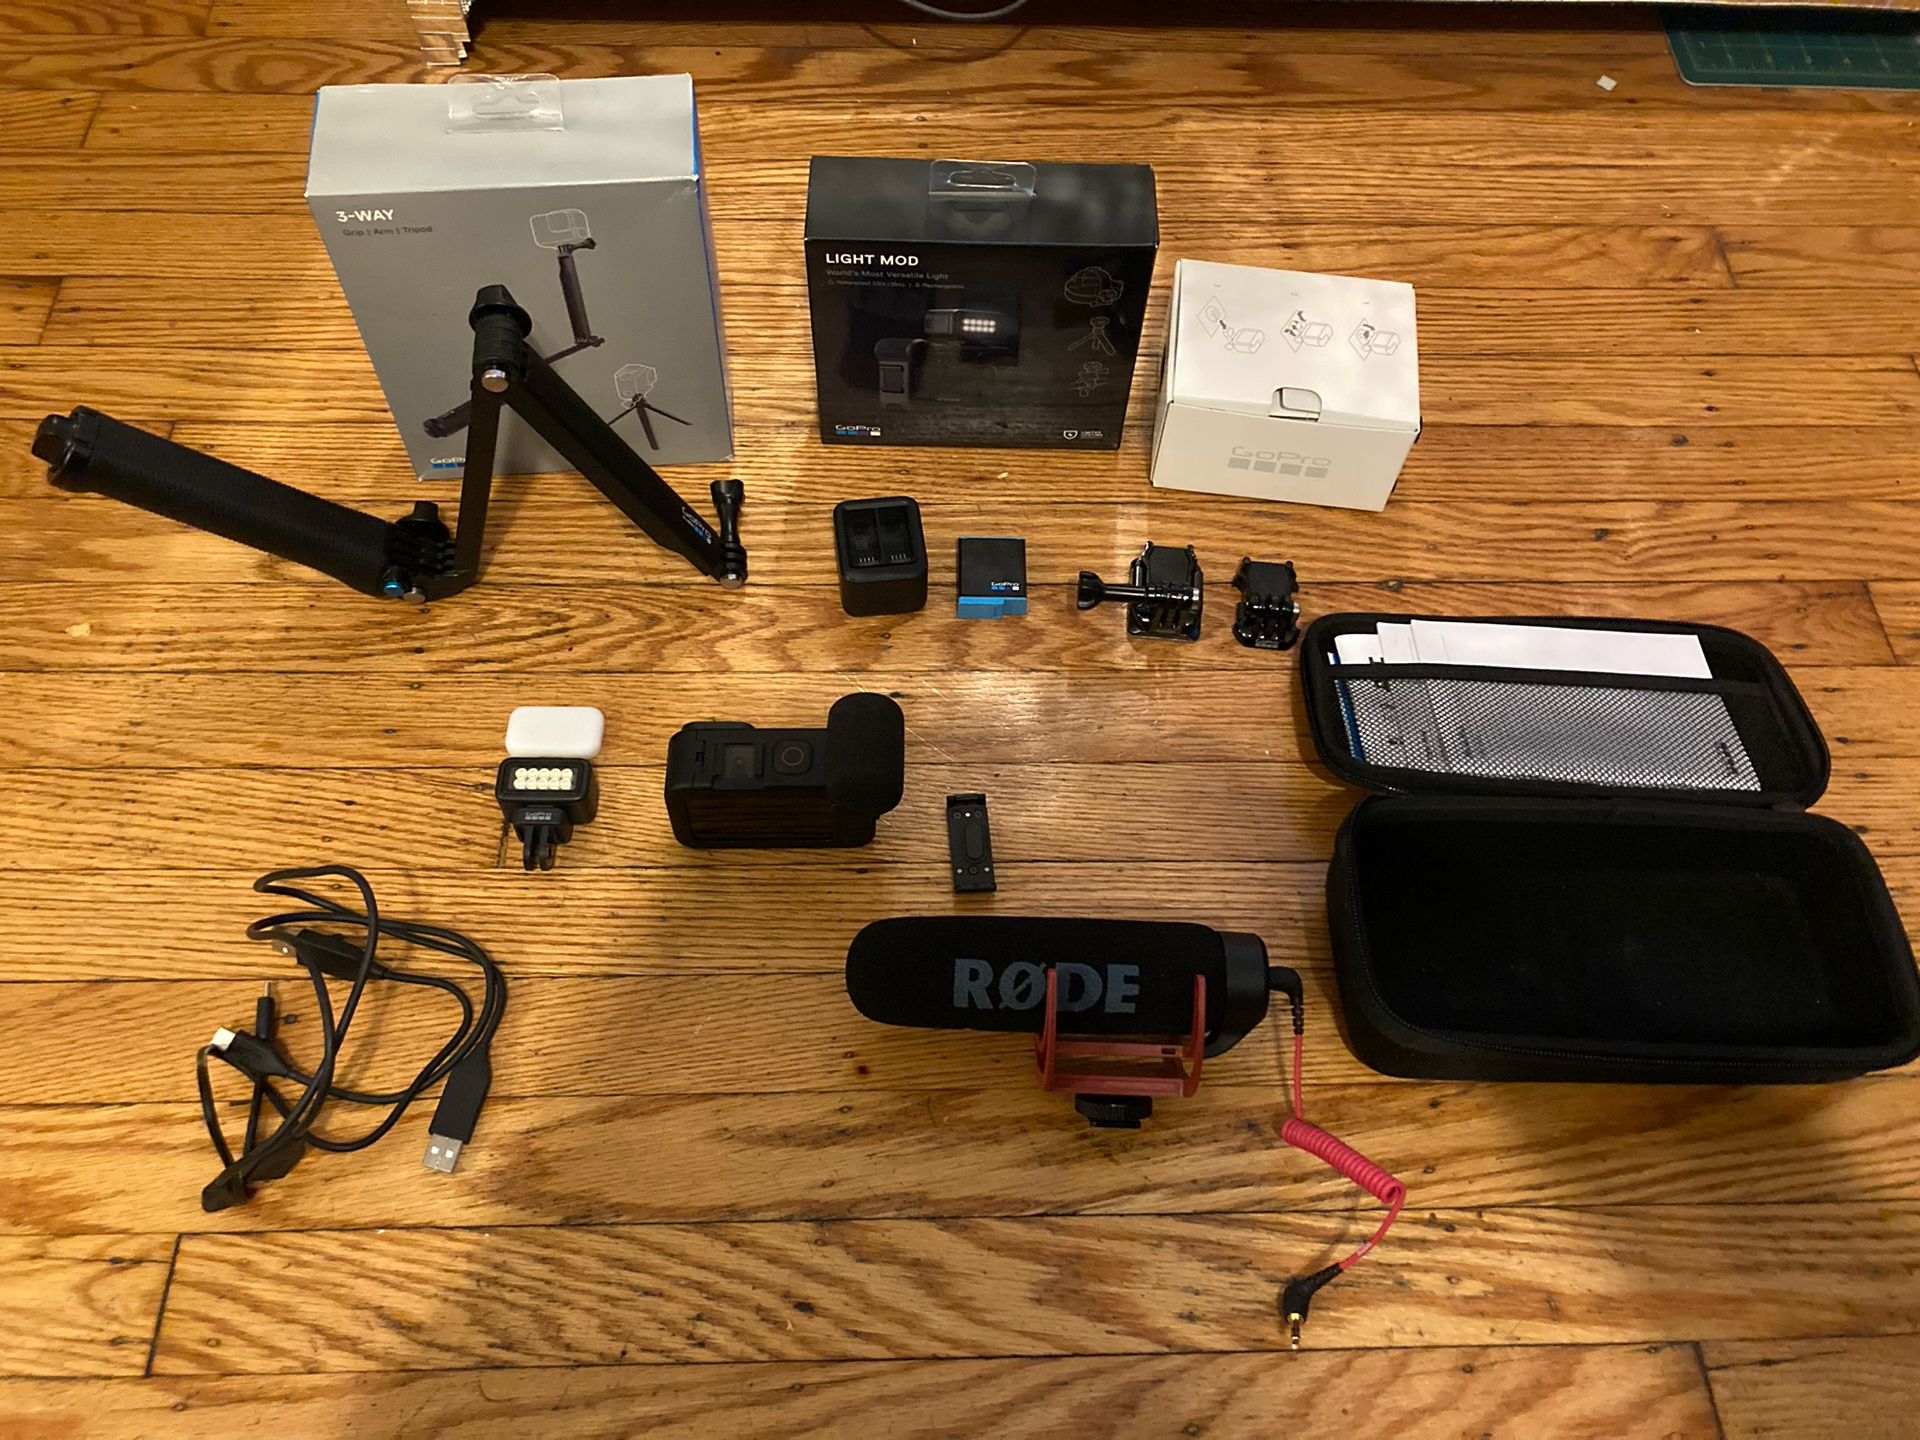 GoPro hero9 black camera with many accessories media mod light mod rode mic 256gb sd card tested